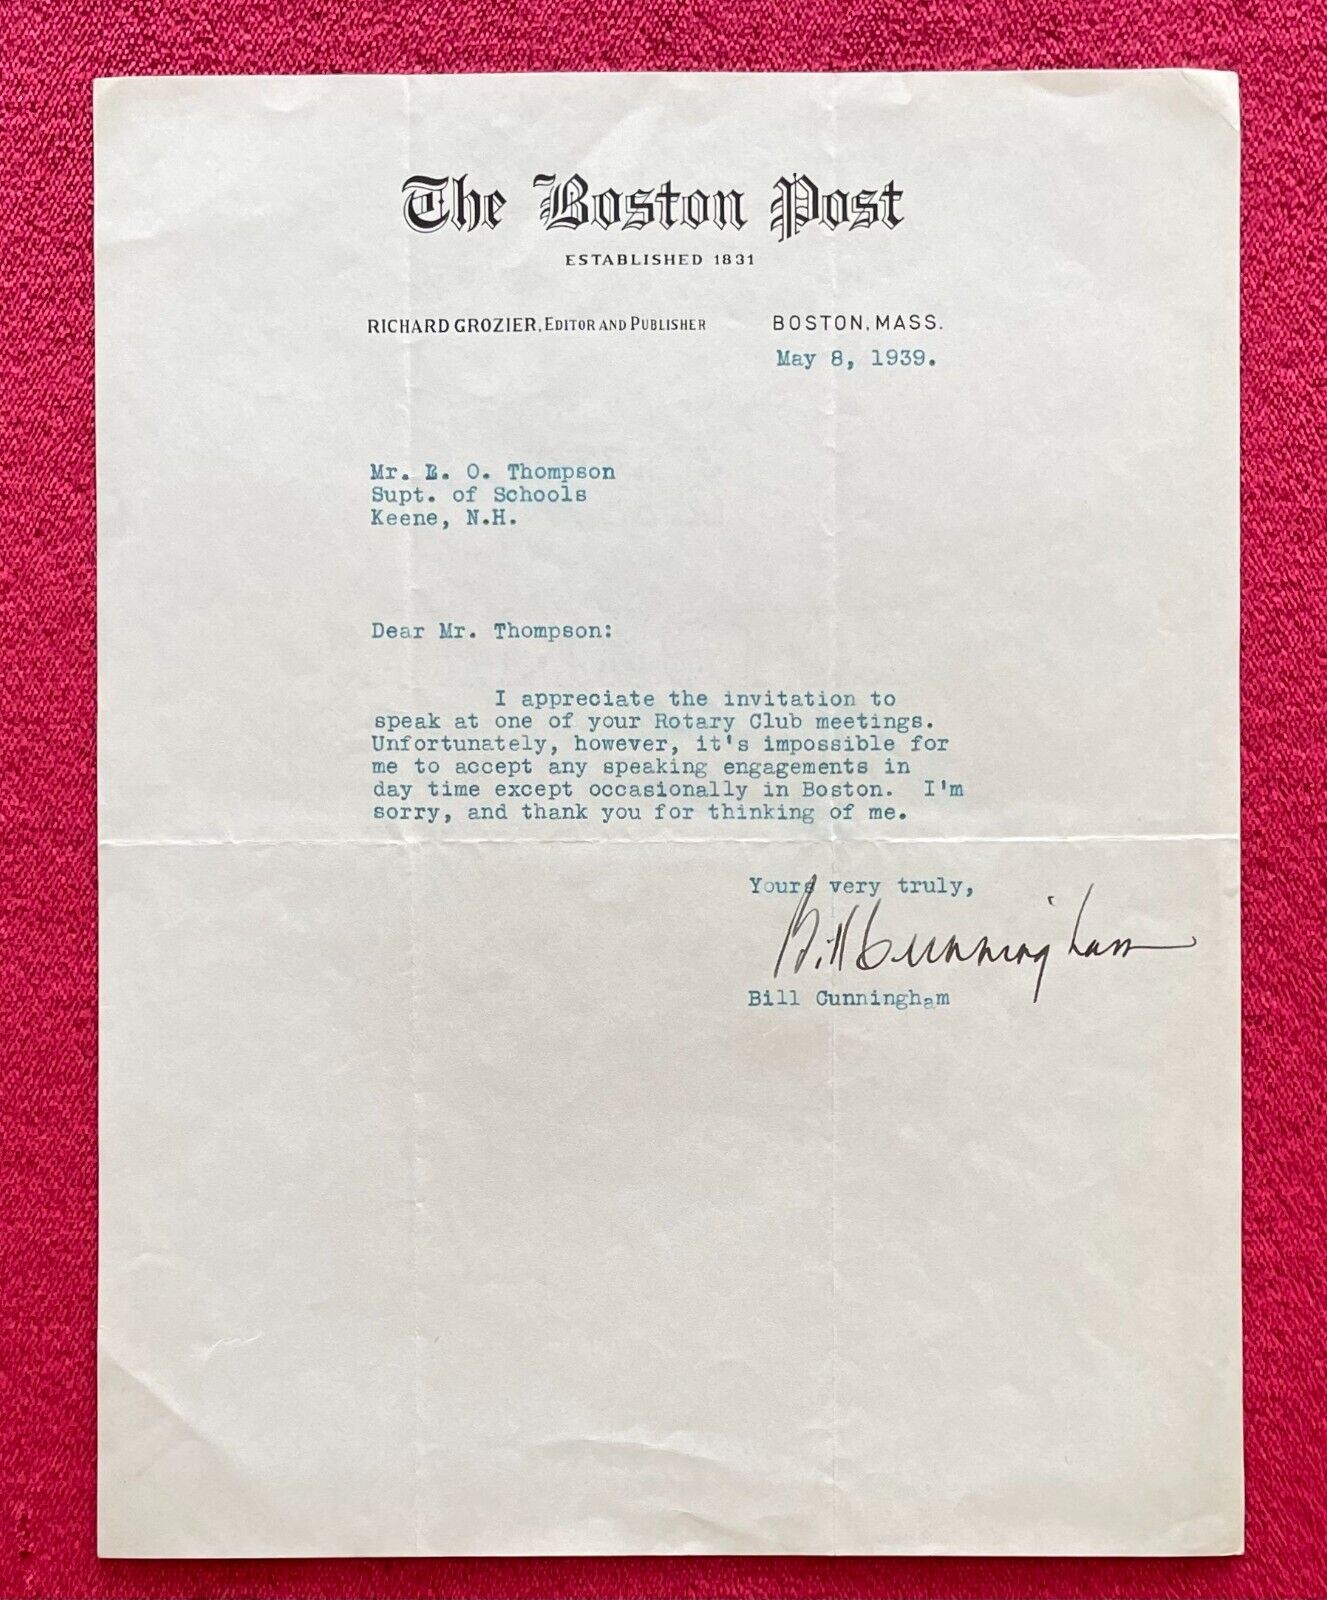 1939 BOSTON POST LETTER FROM NATIONALLY KNOWN SPORTS WRITER BILL CUNNINGHAM